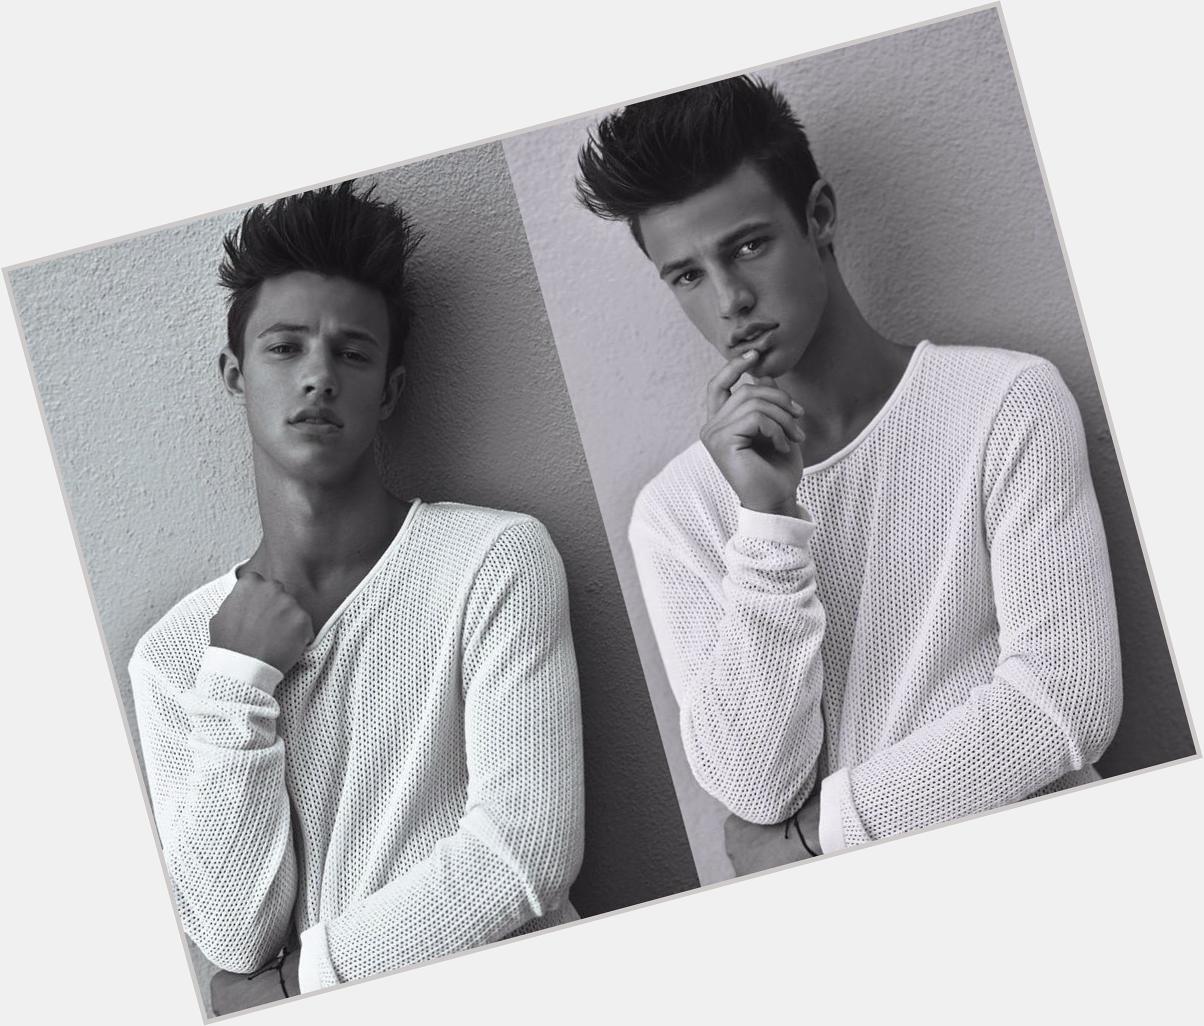 HAPPY BIRTHDAY TO THE ONE aND ONLY CAMERON DALLAS DONT GET TOO CRAZY I LOVE YOUU 